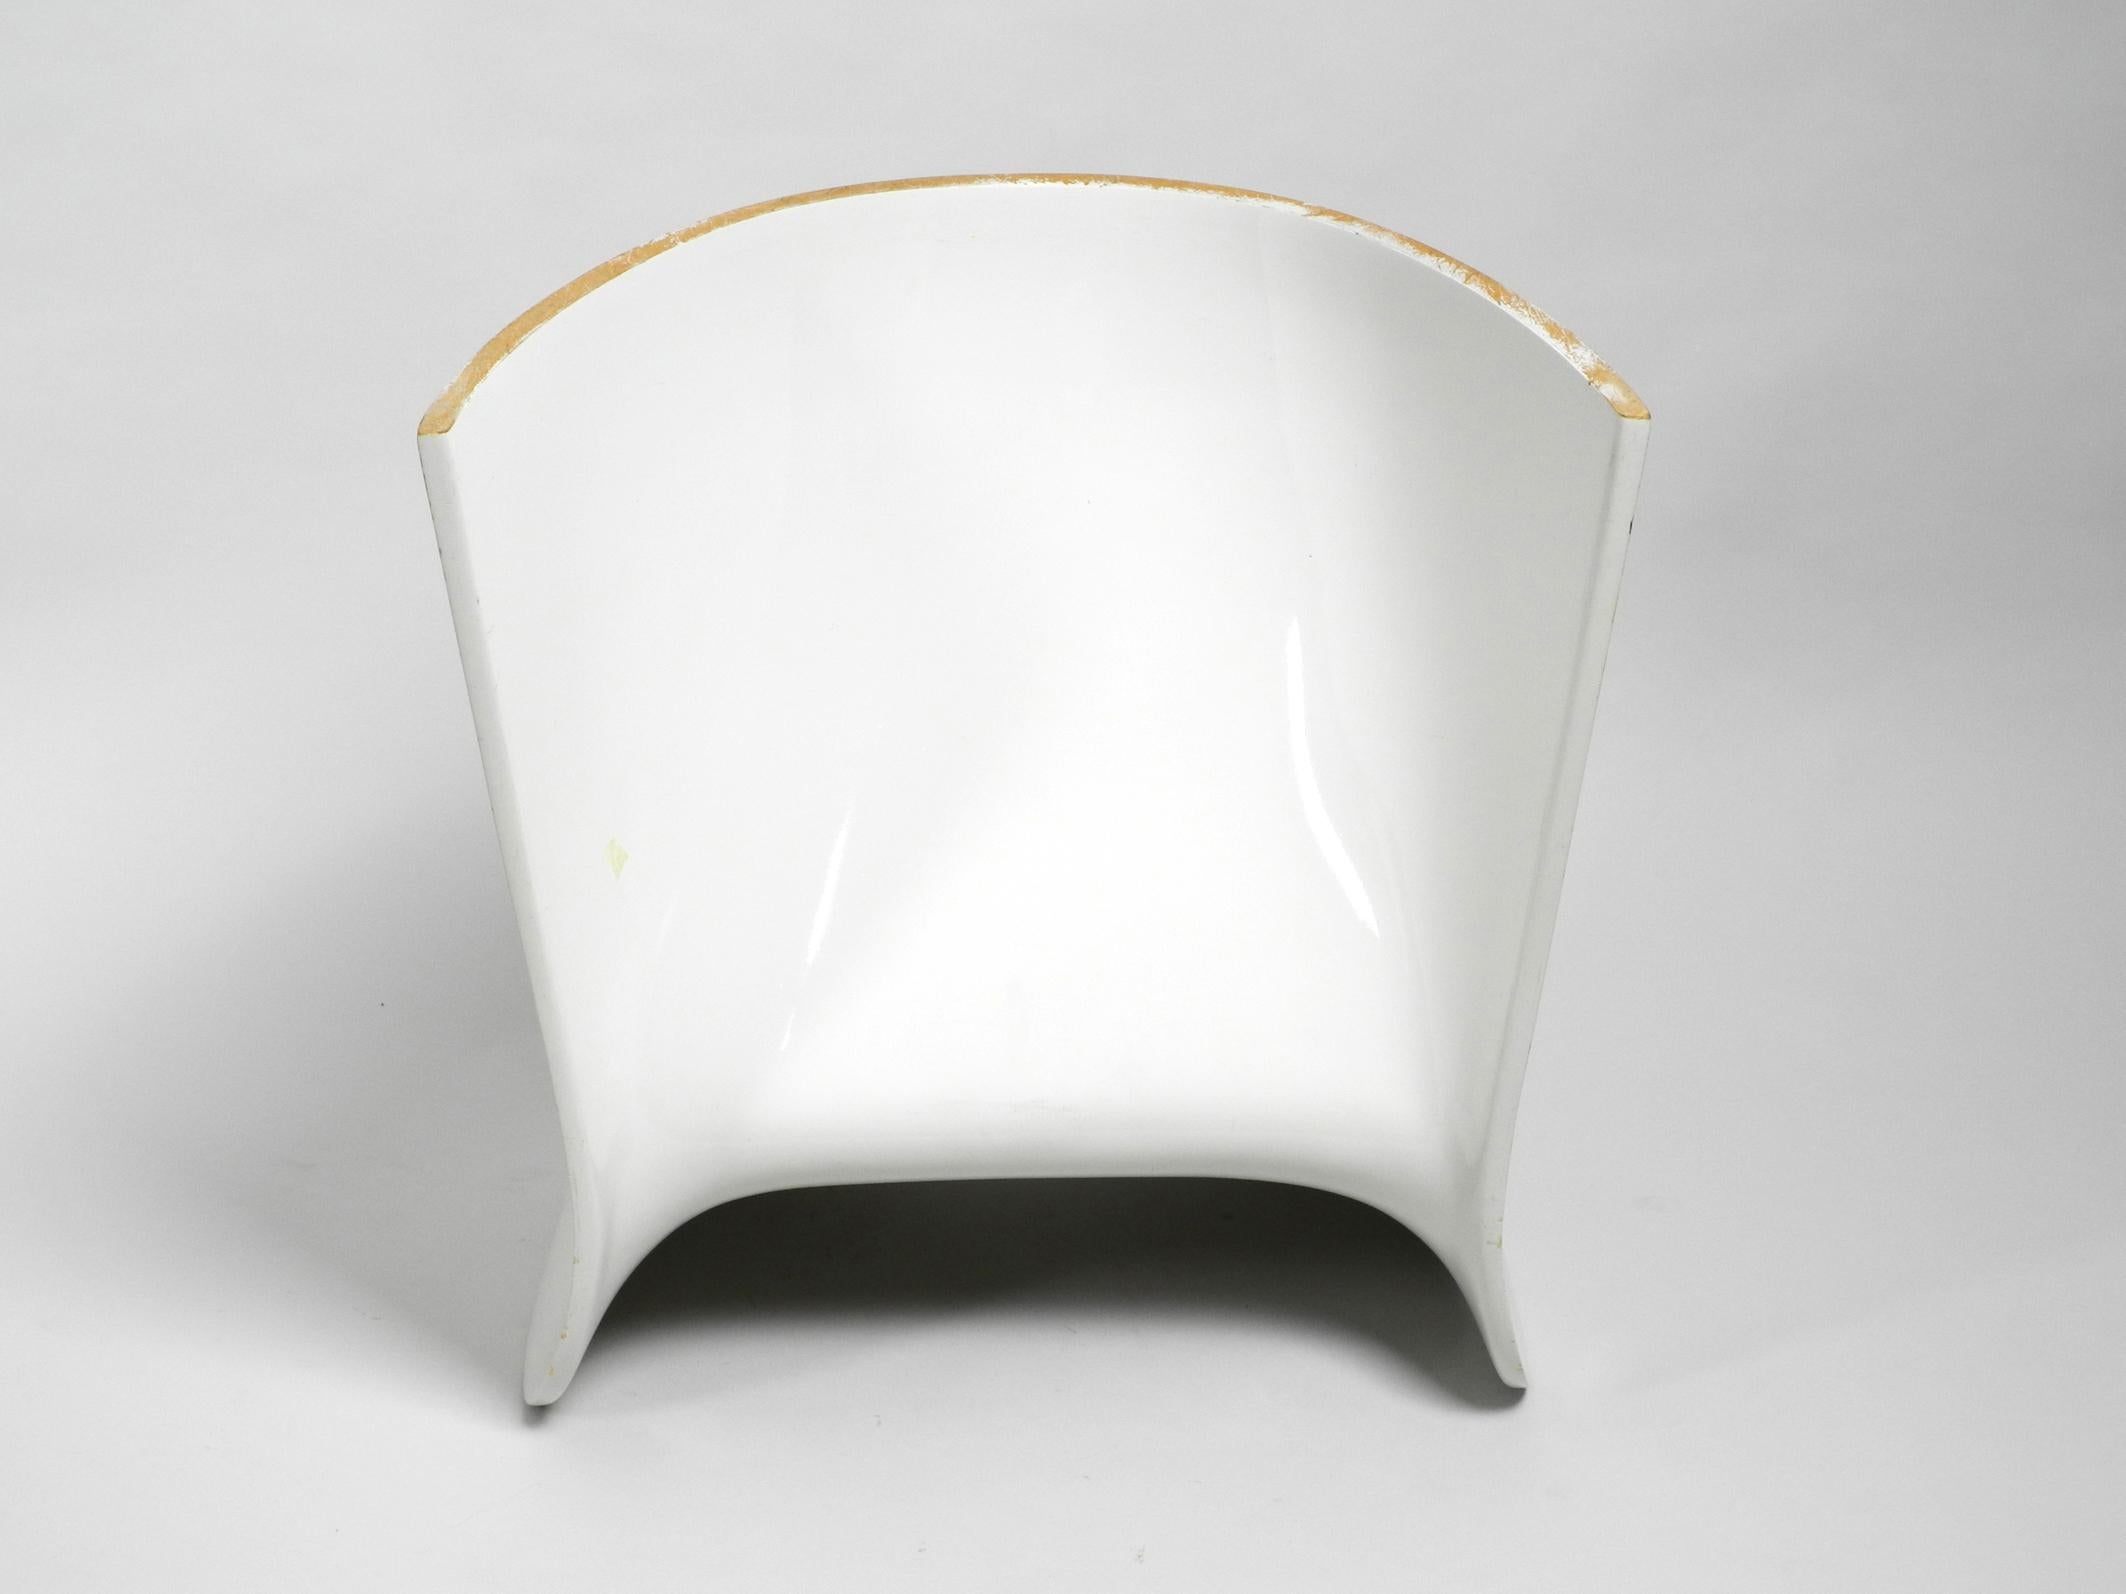 Rare White Stool by Winfried Staeb from the 1970s for Form + Life Collection 2